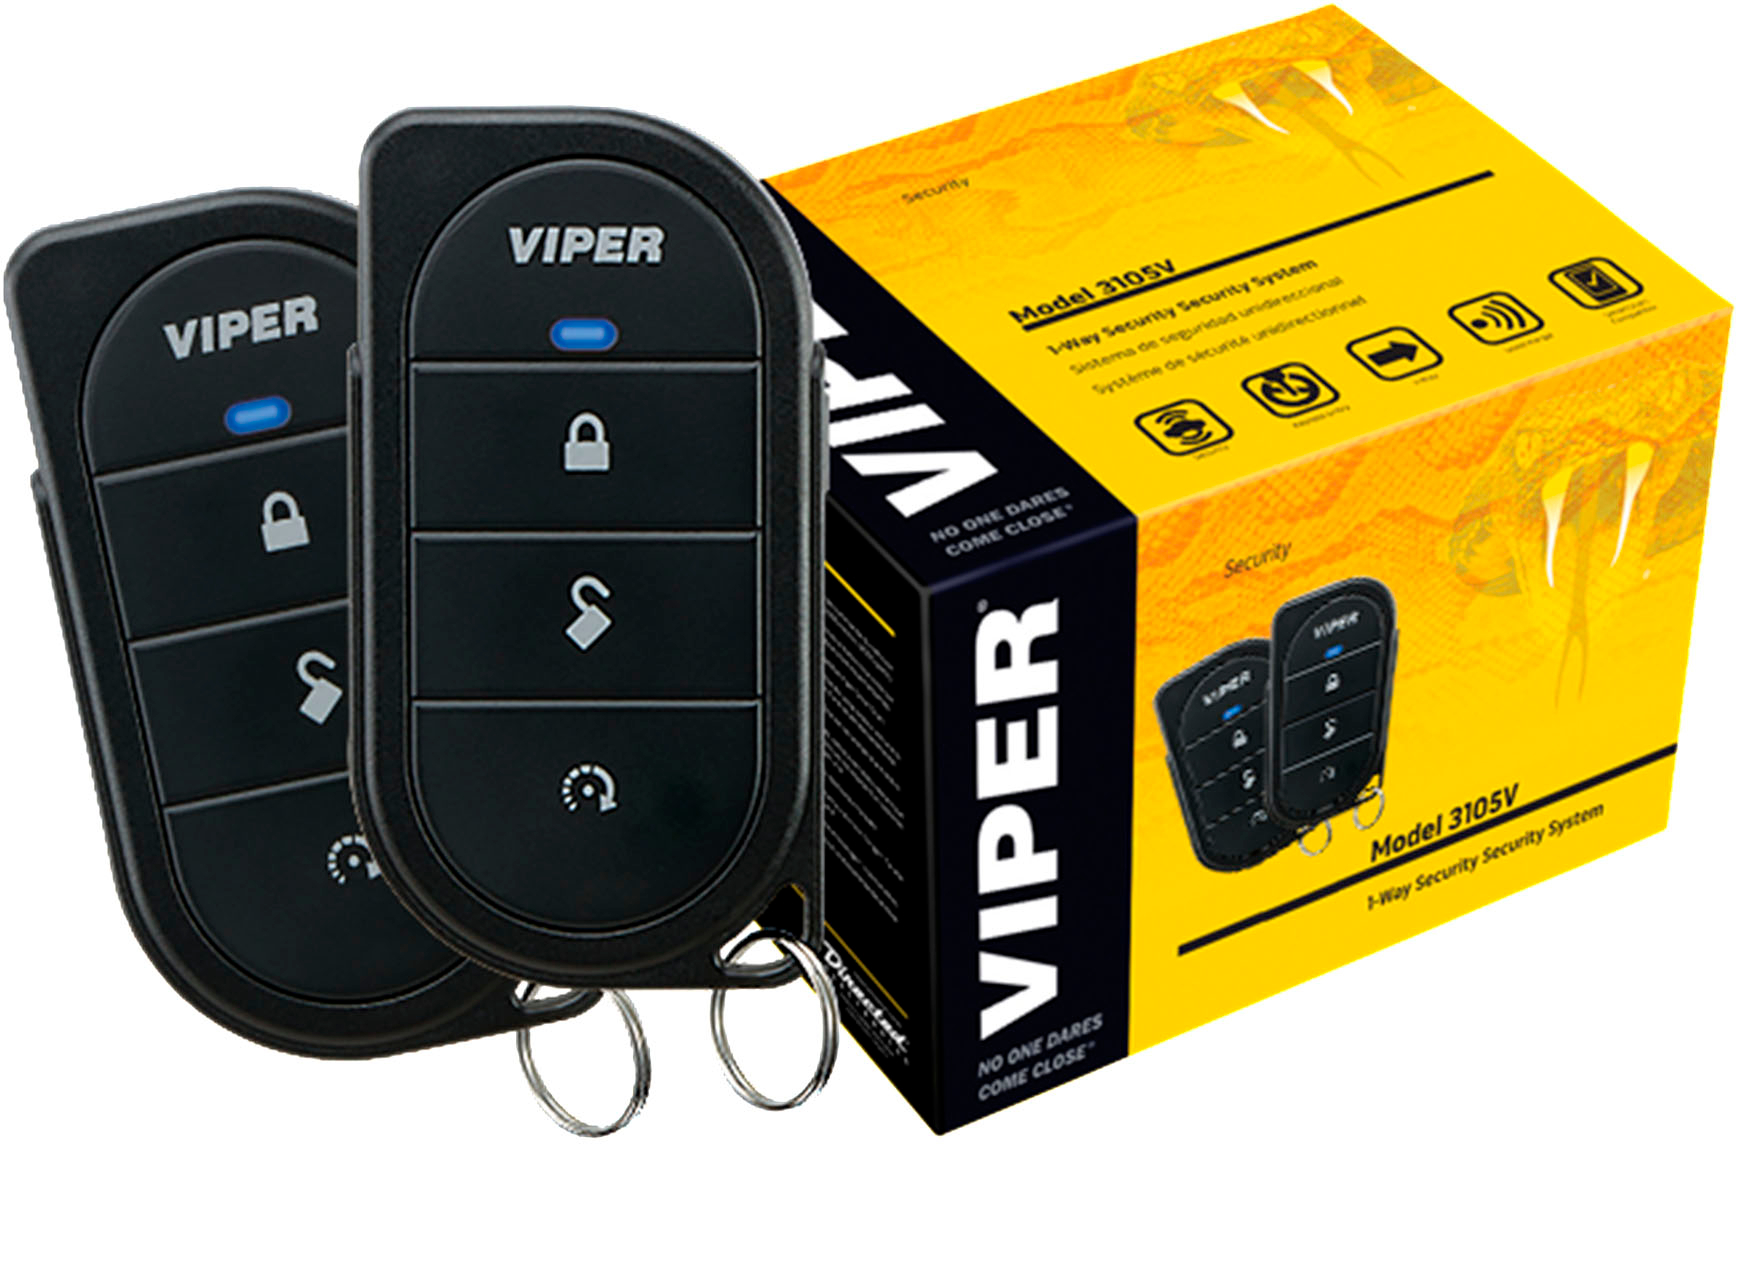 Viper - 1 Way Security System with Keyless Entry